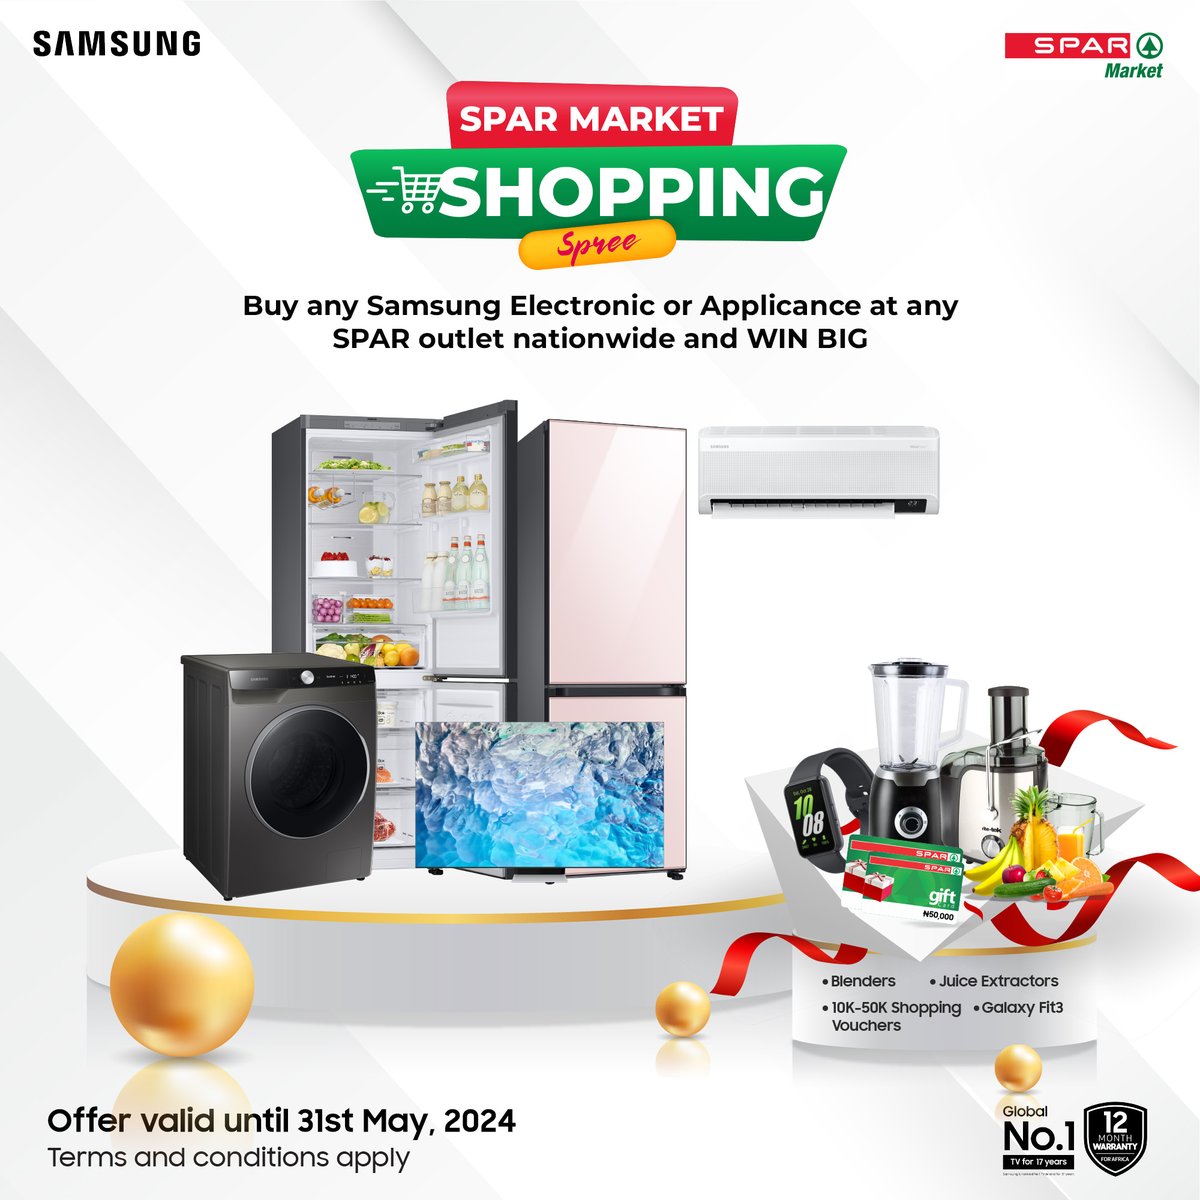 Great news! The Samsung x SPAR Shopping Spree is EXTENDED! From now till May 31st, head to any SPAR outlet nationwide and purchase Samsung Electronics & Appliances for a chance to win incredible gifts worth up to ₦100,000! Terms and Condition apply. #SamsungNigeria